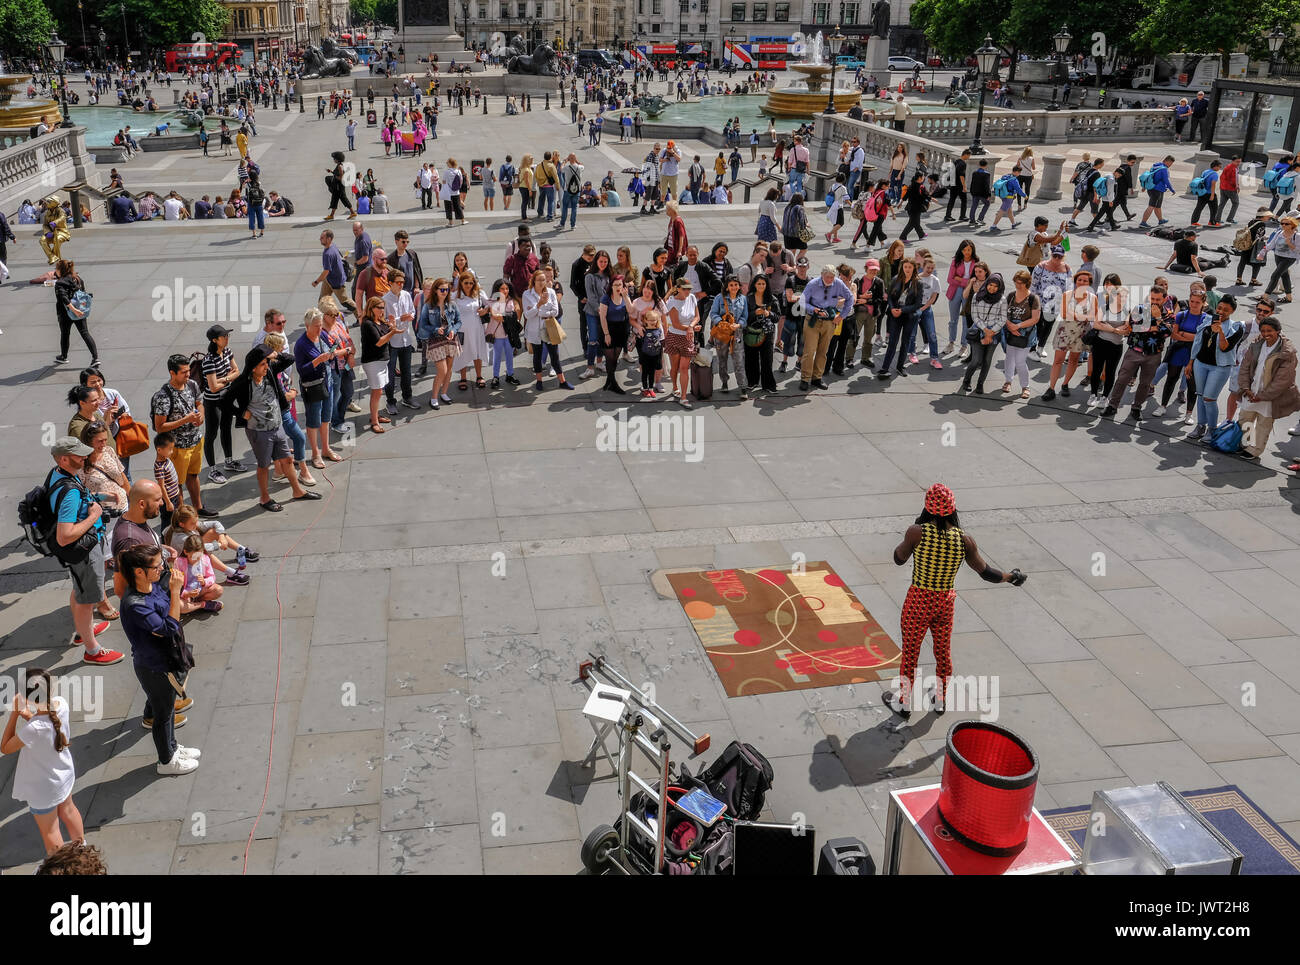 Trafalgar Square, London, UK -  July 21, 2017: Street performer with large crowd watching.  Taken from the National Portrait Gallery, looking down. Stock Photo